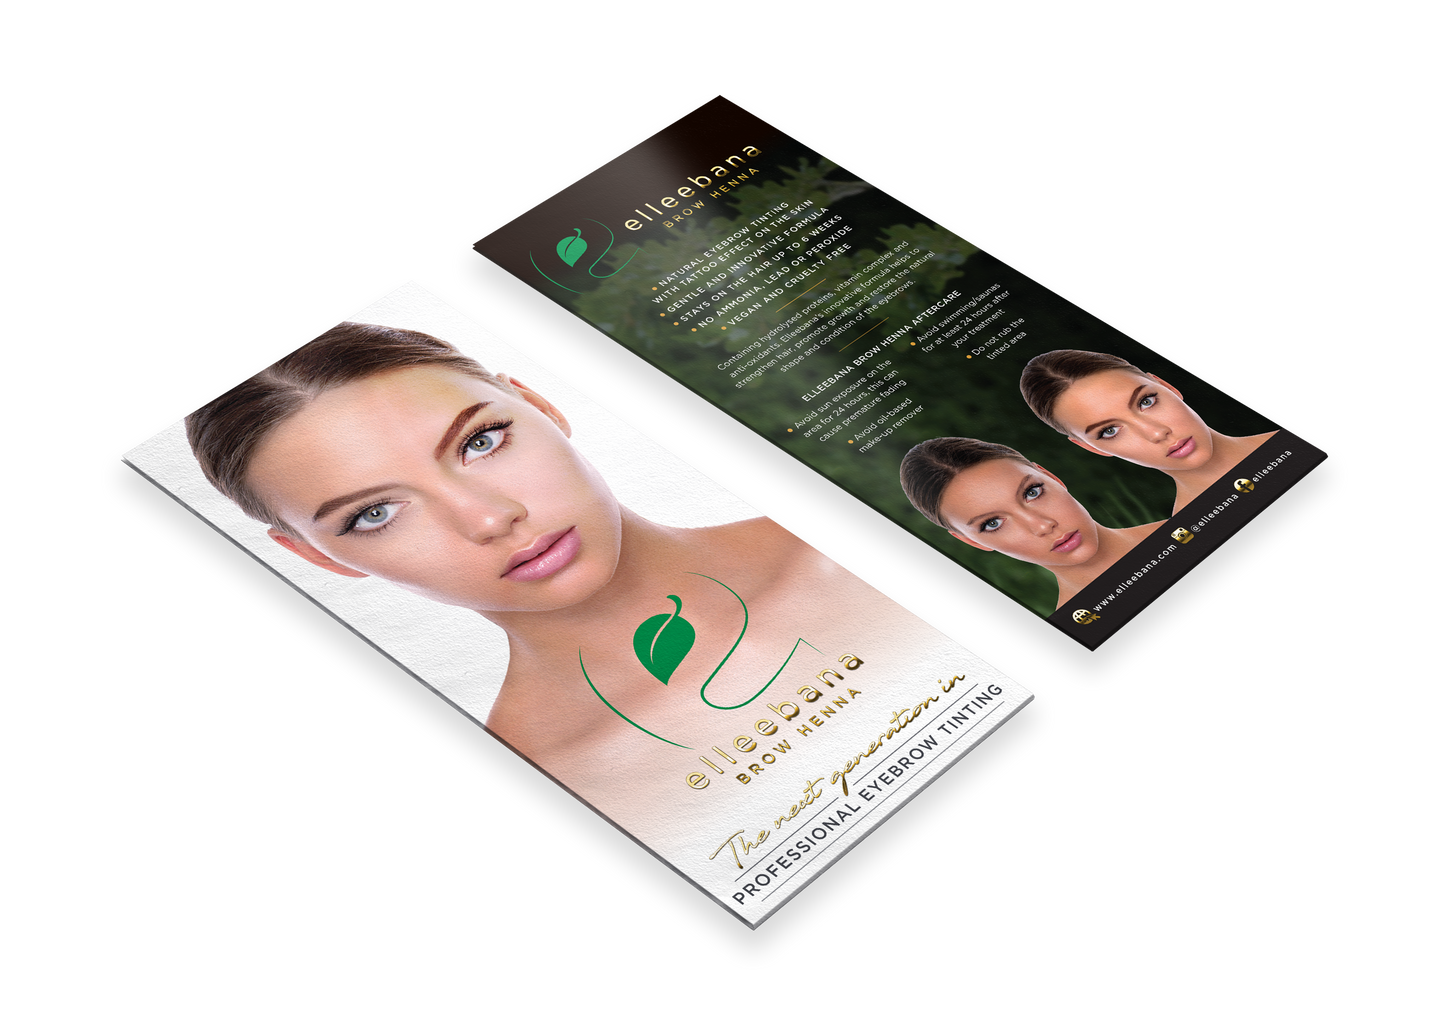 Henna Brows 2 in 1 salon leaflets, promo and aftercare pack of 50 flyers